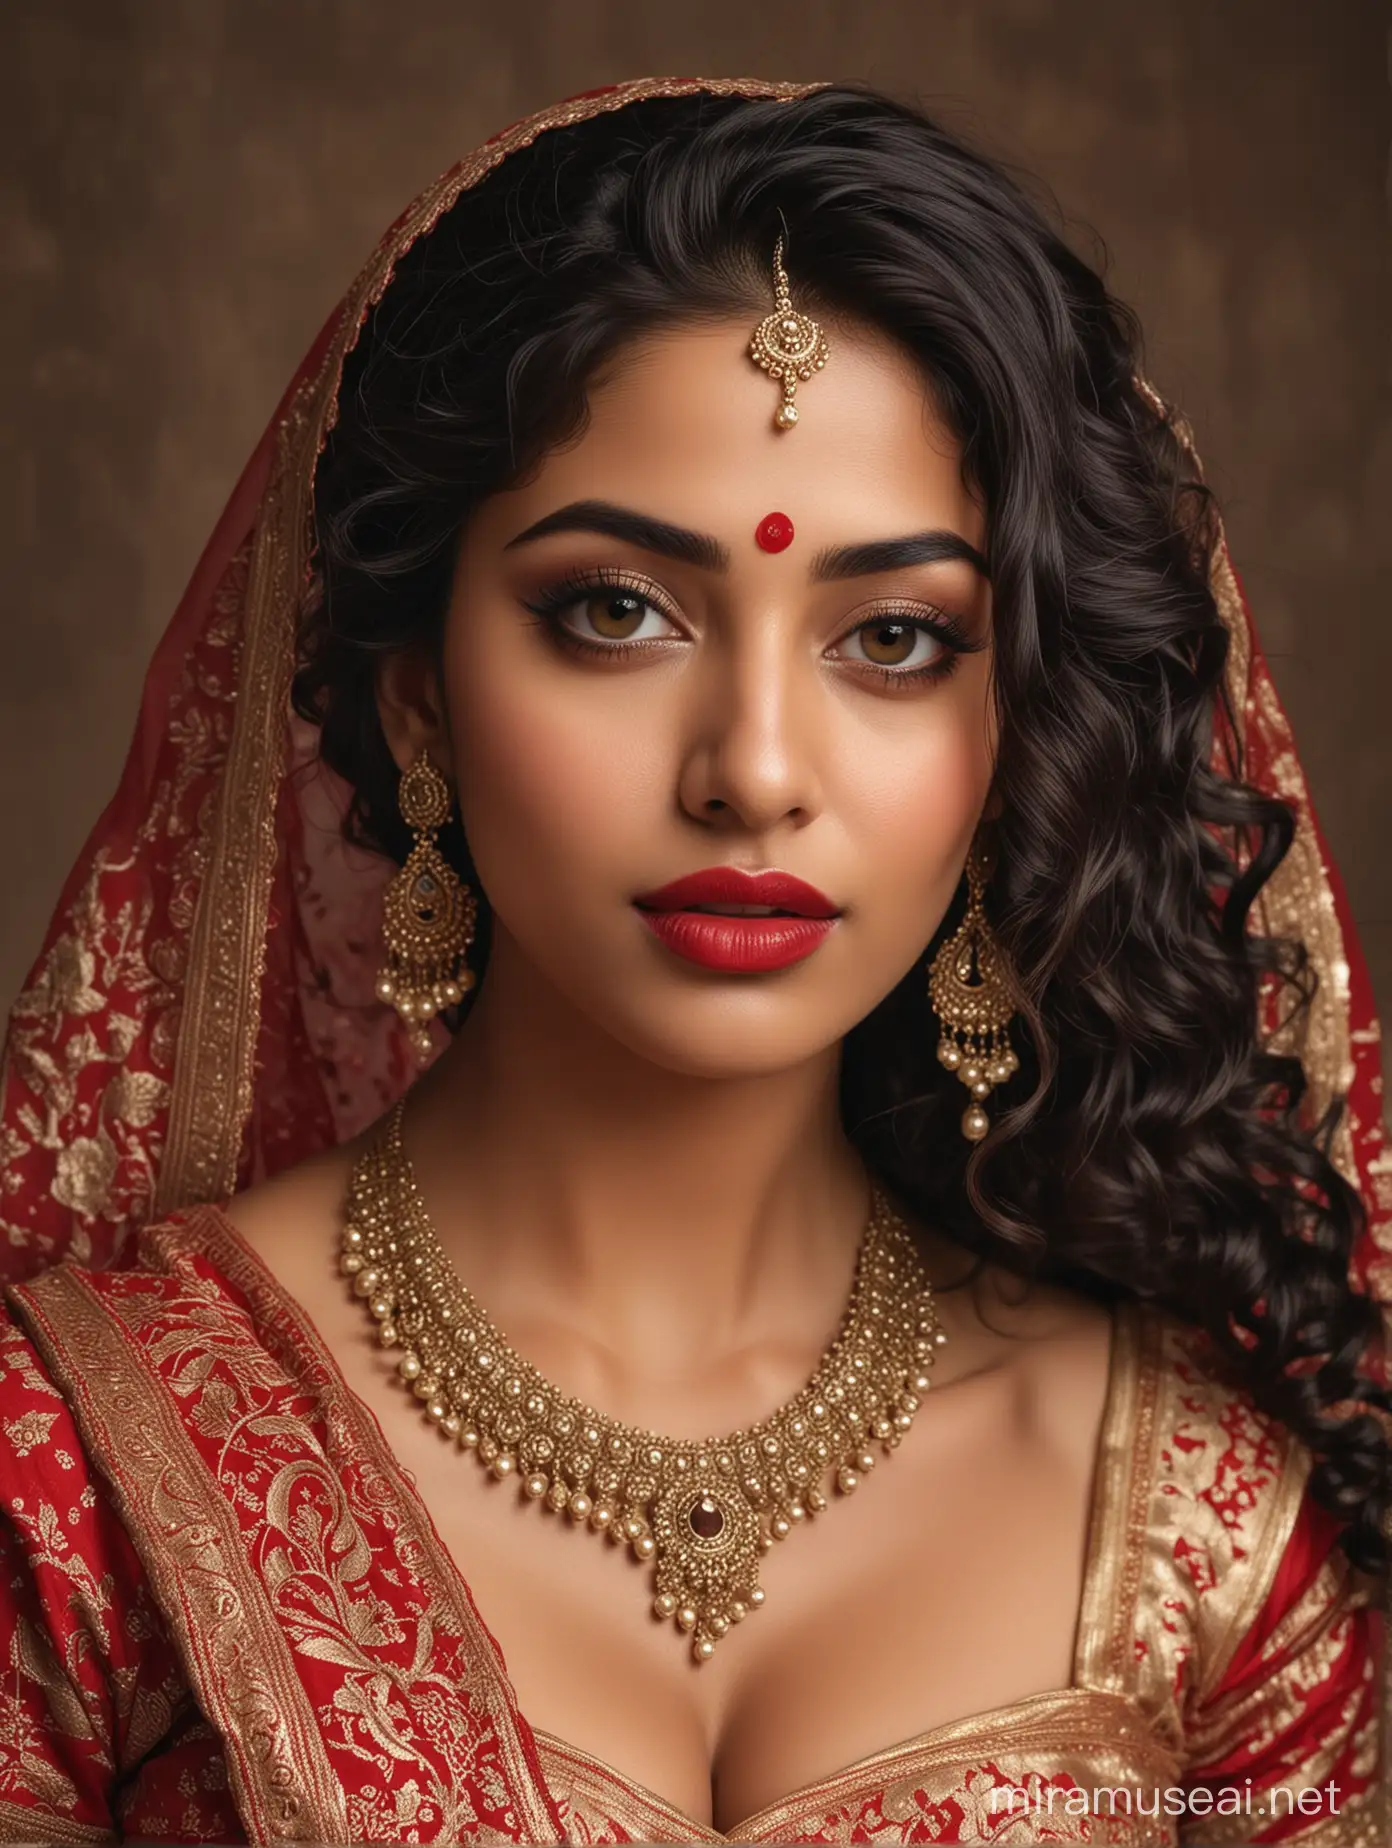 full body photo of european man as indian gentleman, 
intimately holding,  most beautiful european woman as beautiful indian woman, big wide black eyes with eye makeup, thick long curly hair , face completely bent down, wide big eyes, brows raised, eyes looking up, innocent alluring sexy looks, shy wide smile, intimate looks, bridal makeup, full body jewelry, perfect symmetric face and eyes, full breasts, glossy dark red lipsticks, intimate alluring come get me looks vulnerable i am yours feeling in looks, elegant traditional modest saree , elegant look, biting lip with ecstasy,
blushed cheeks, intricate details, photo realistic, 4k.